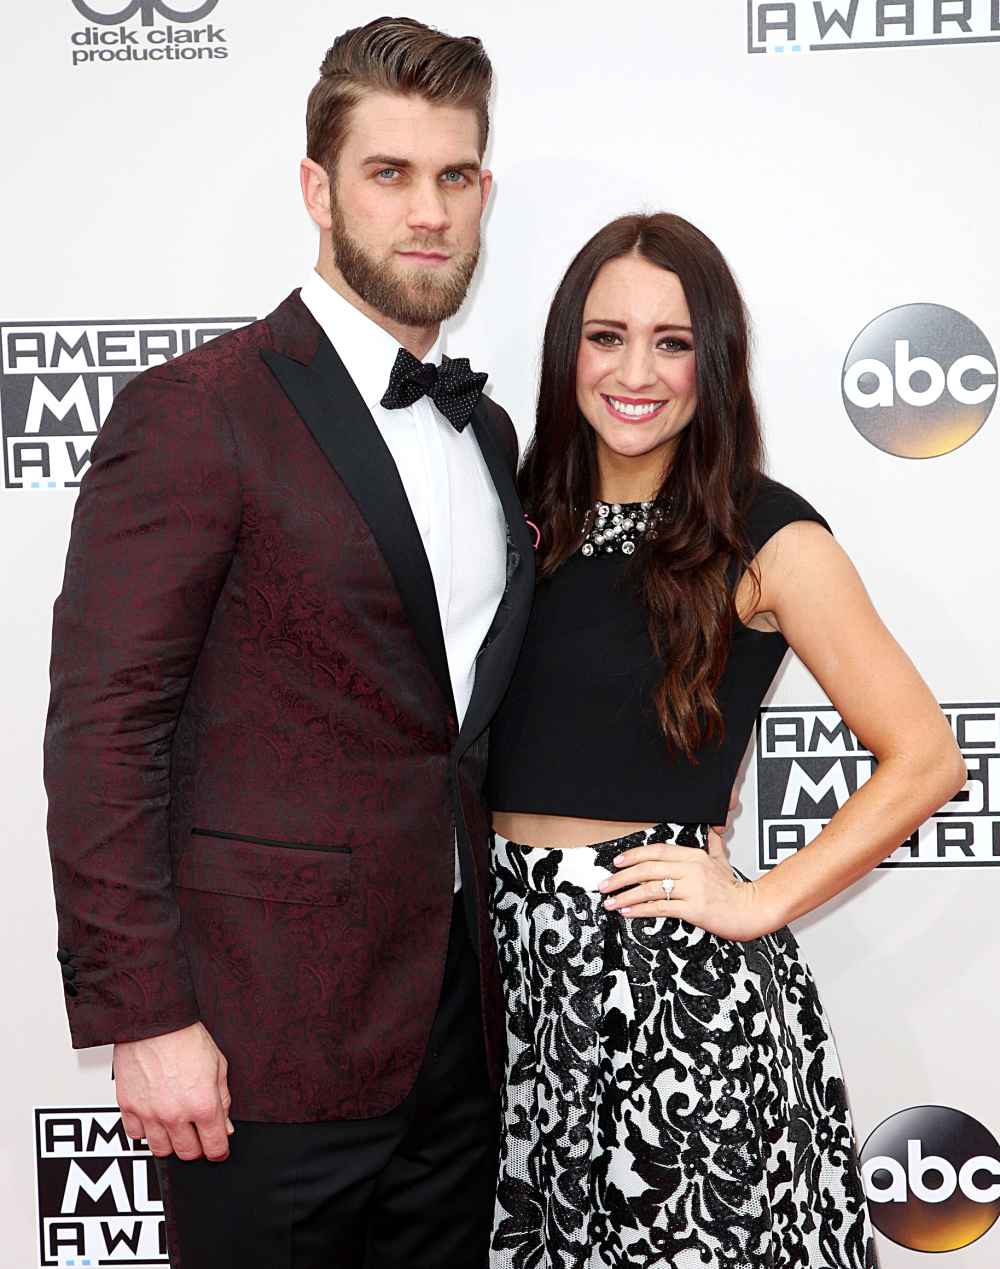 Phillies Player Bryce Harper Expecting 2nd Baby Girl With Wife Kayla Harper